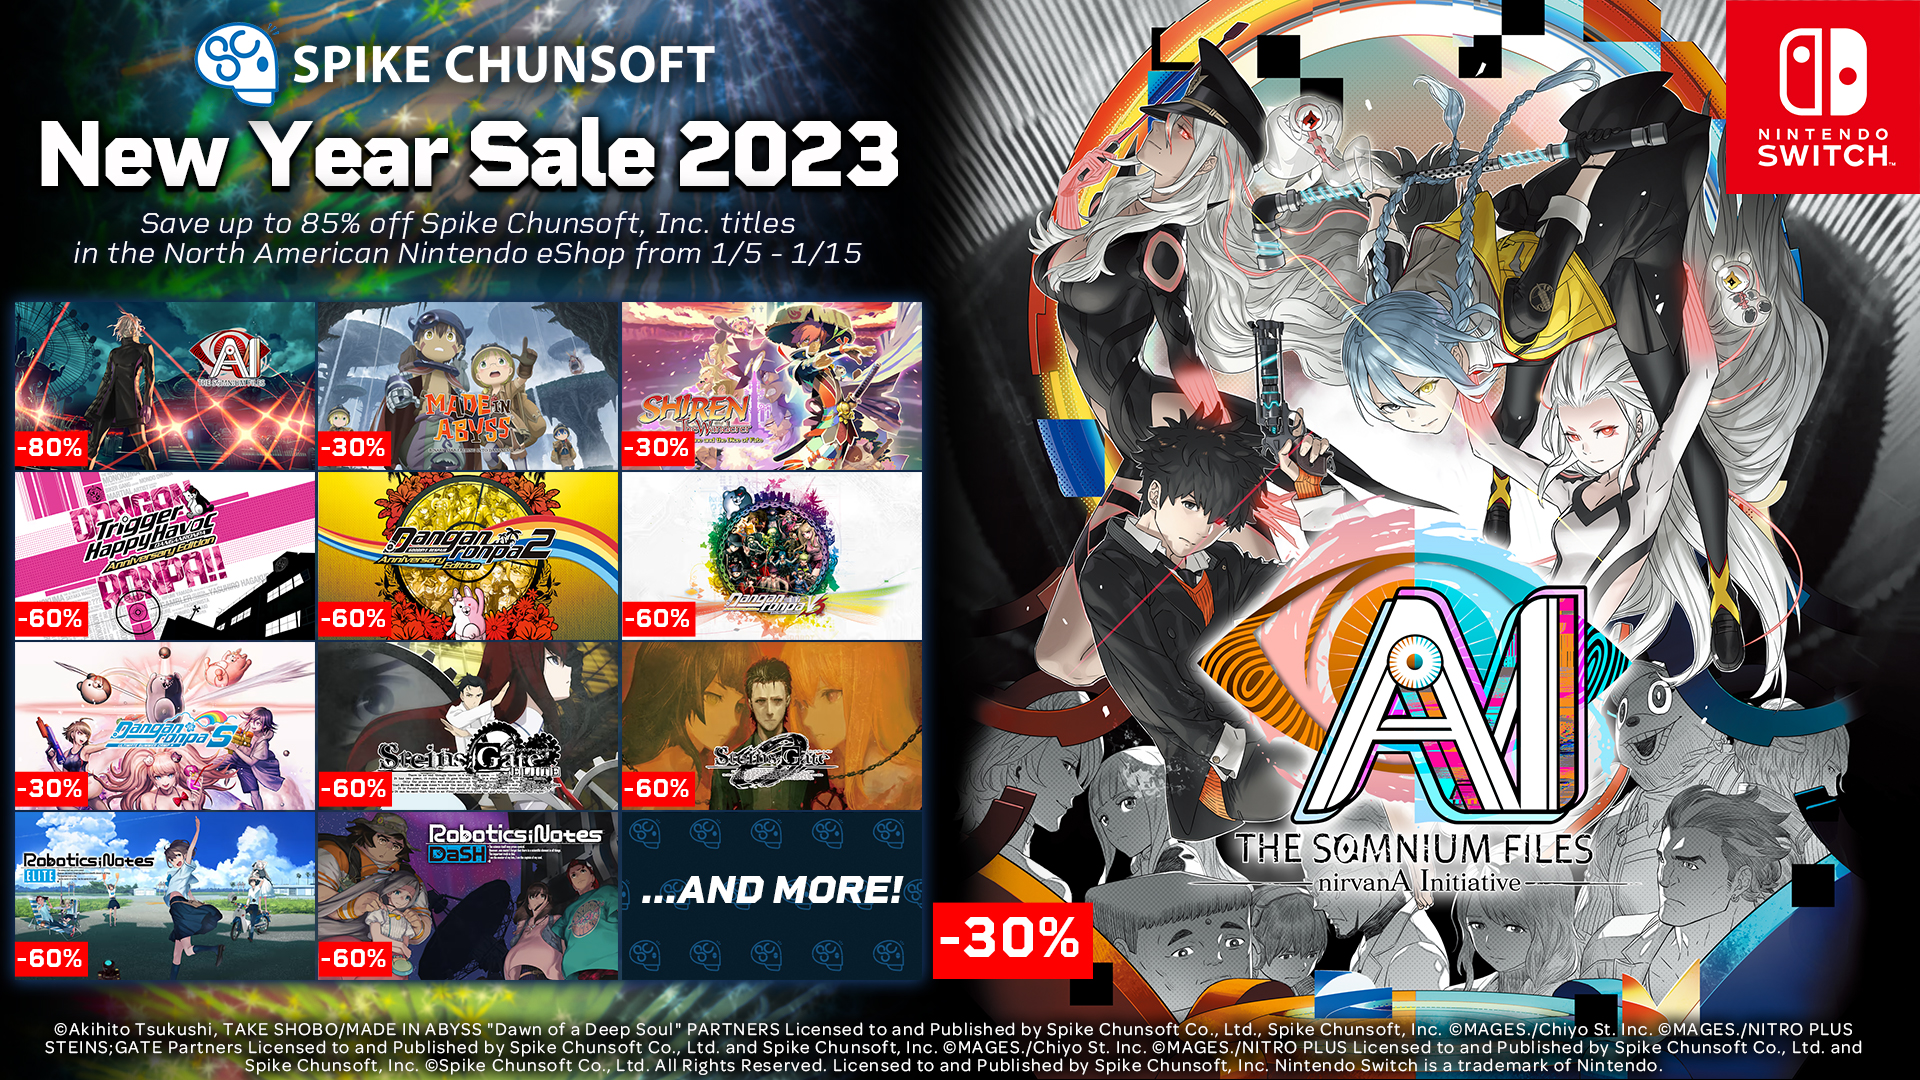 Save up to 85% on Spike Chunsoft, Inc. Games During the